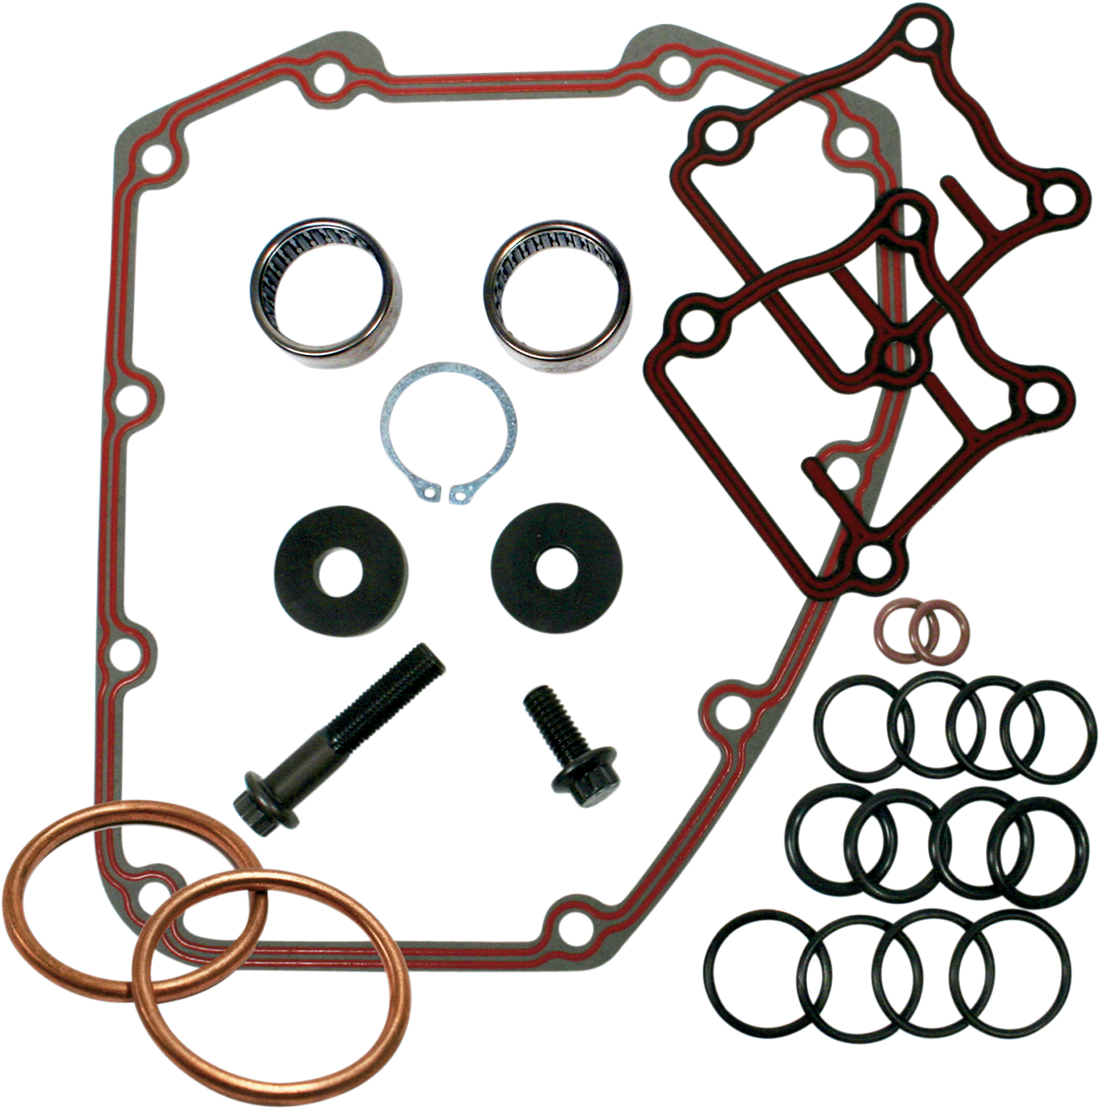 0925-0436 - FEULING OIL PUMP CORP. Camshaft Installation Kit - Chain Drive 2070